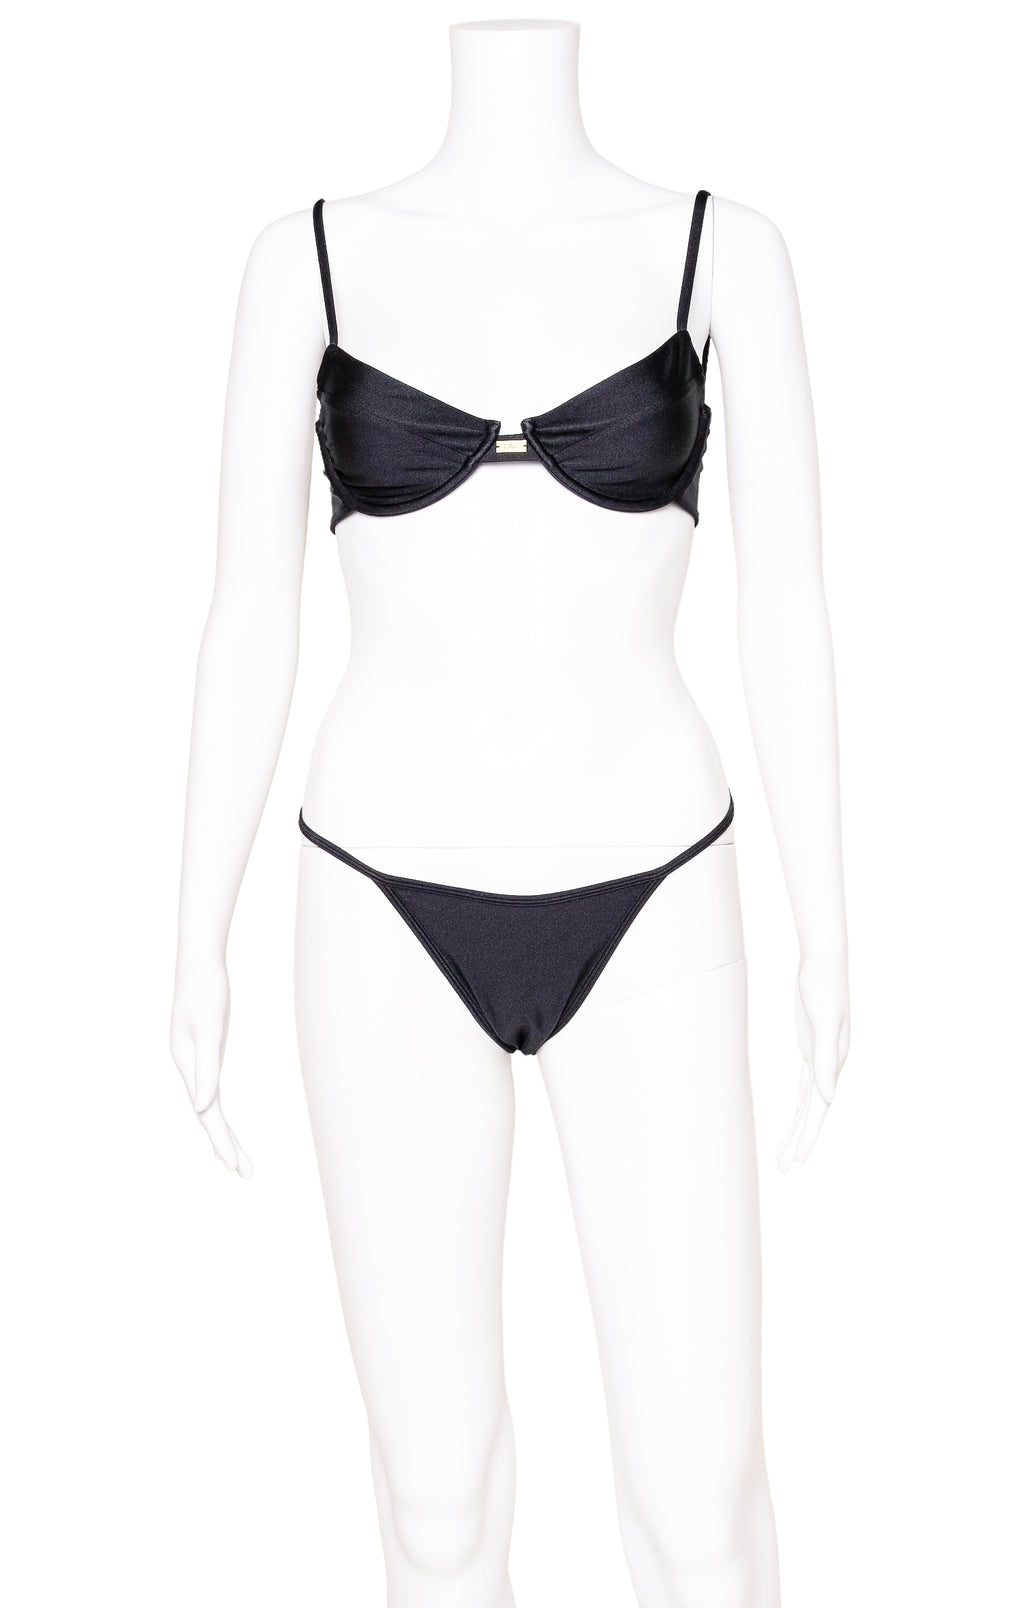 FAE (NEW) with tags Bikini Set Size: Top - S, Bottoms - M